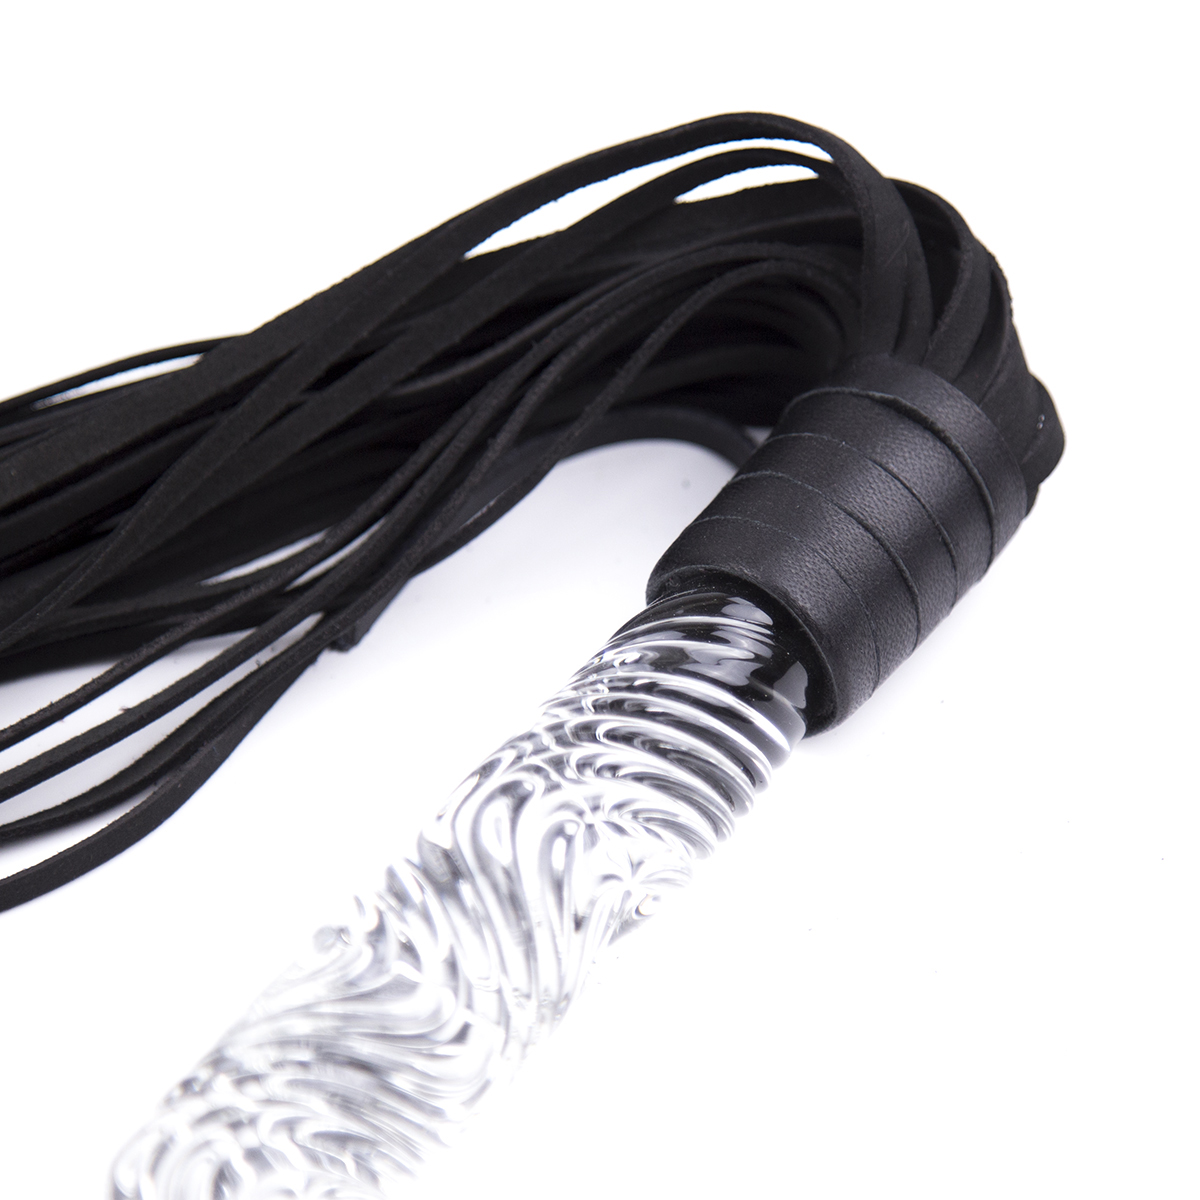 Fancy-Black-Flogger-with-Glass-Handle-OPR-321103-1